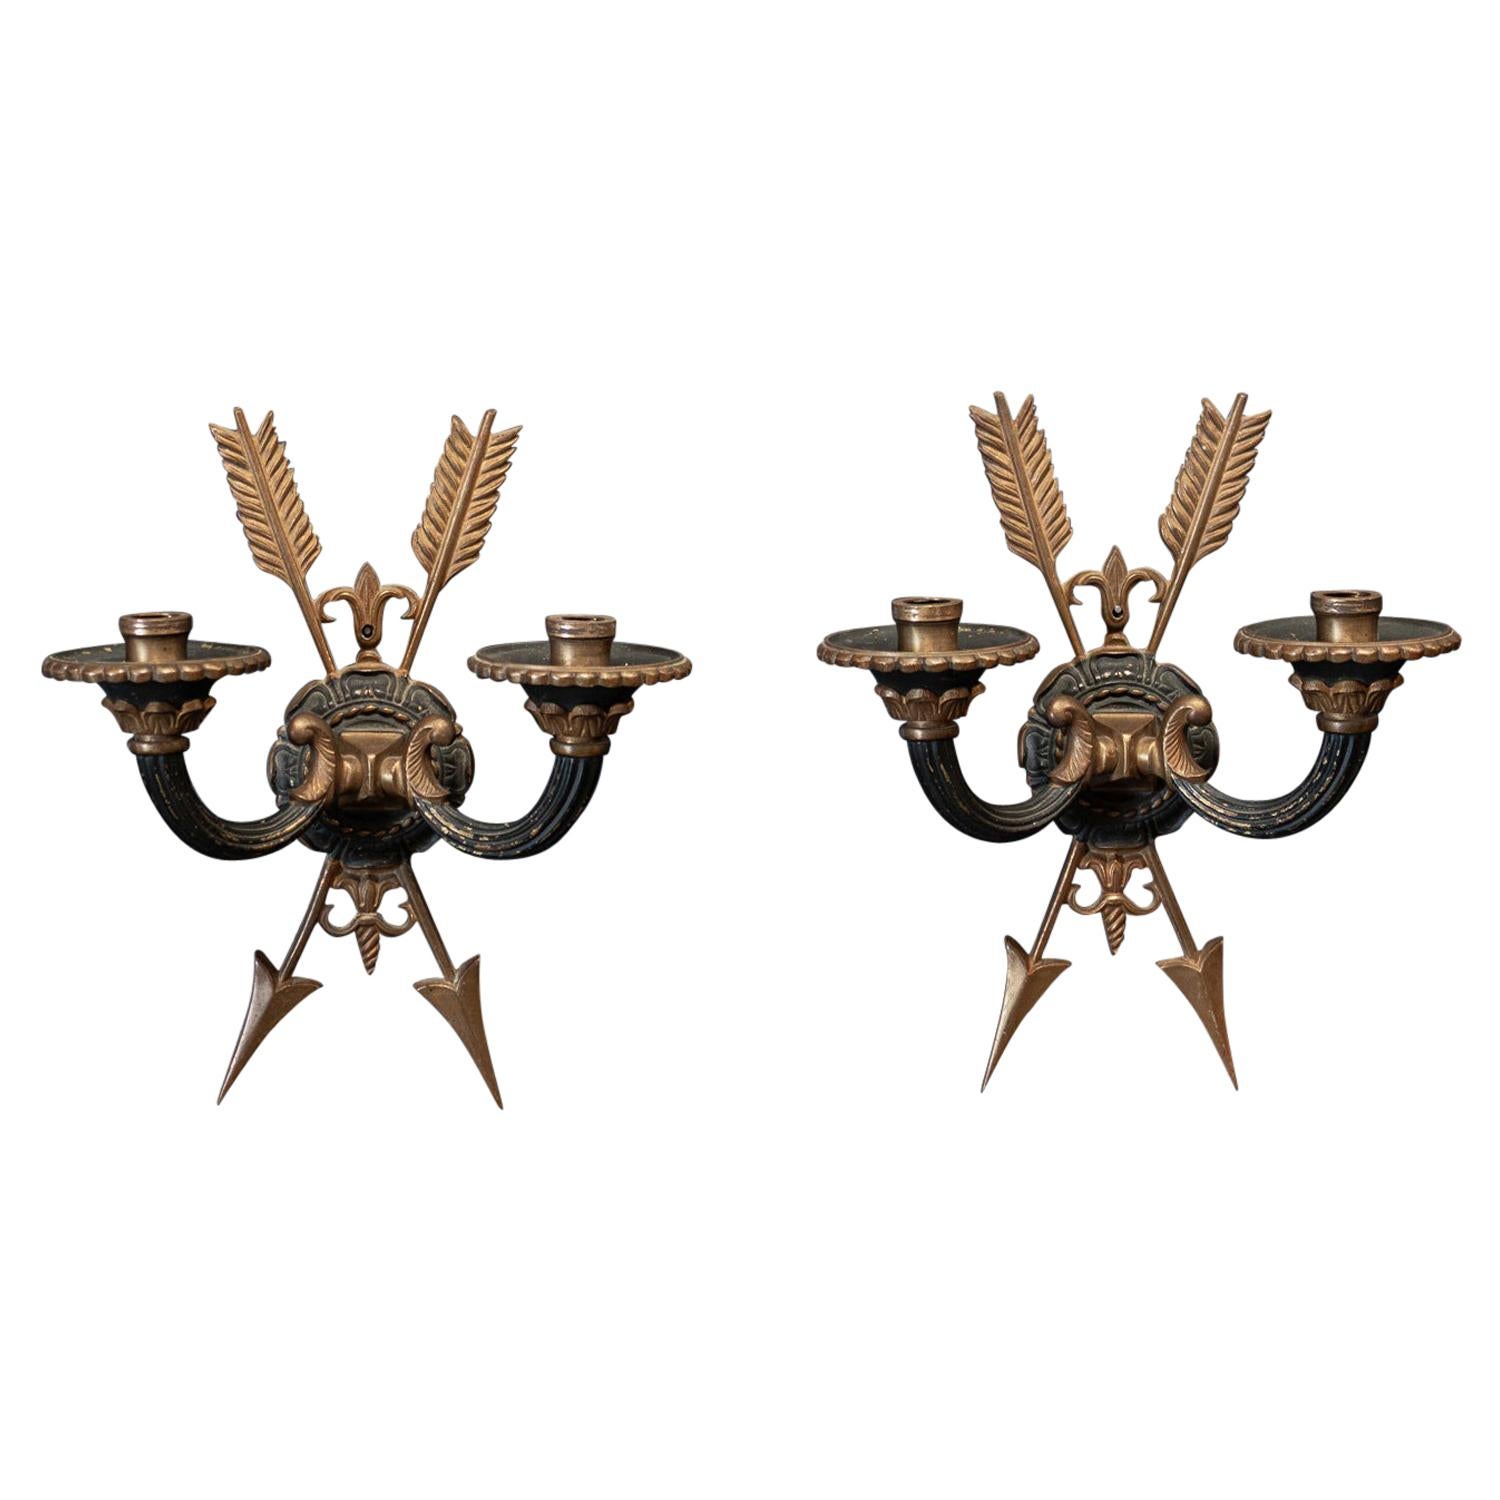 Pair of French Empire Revival Sconces